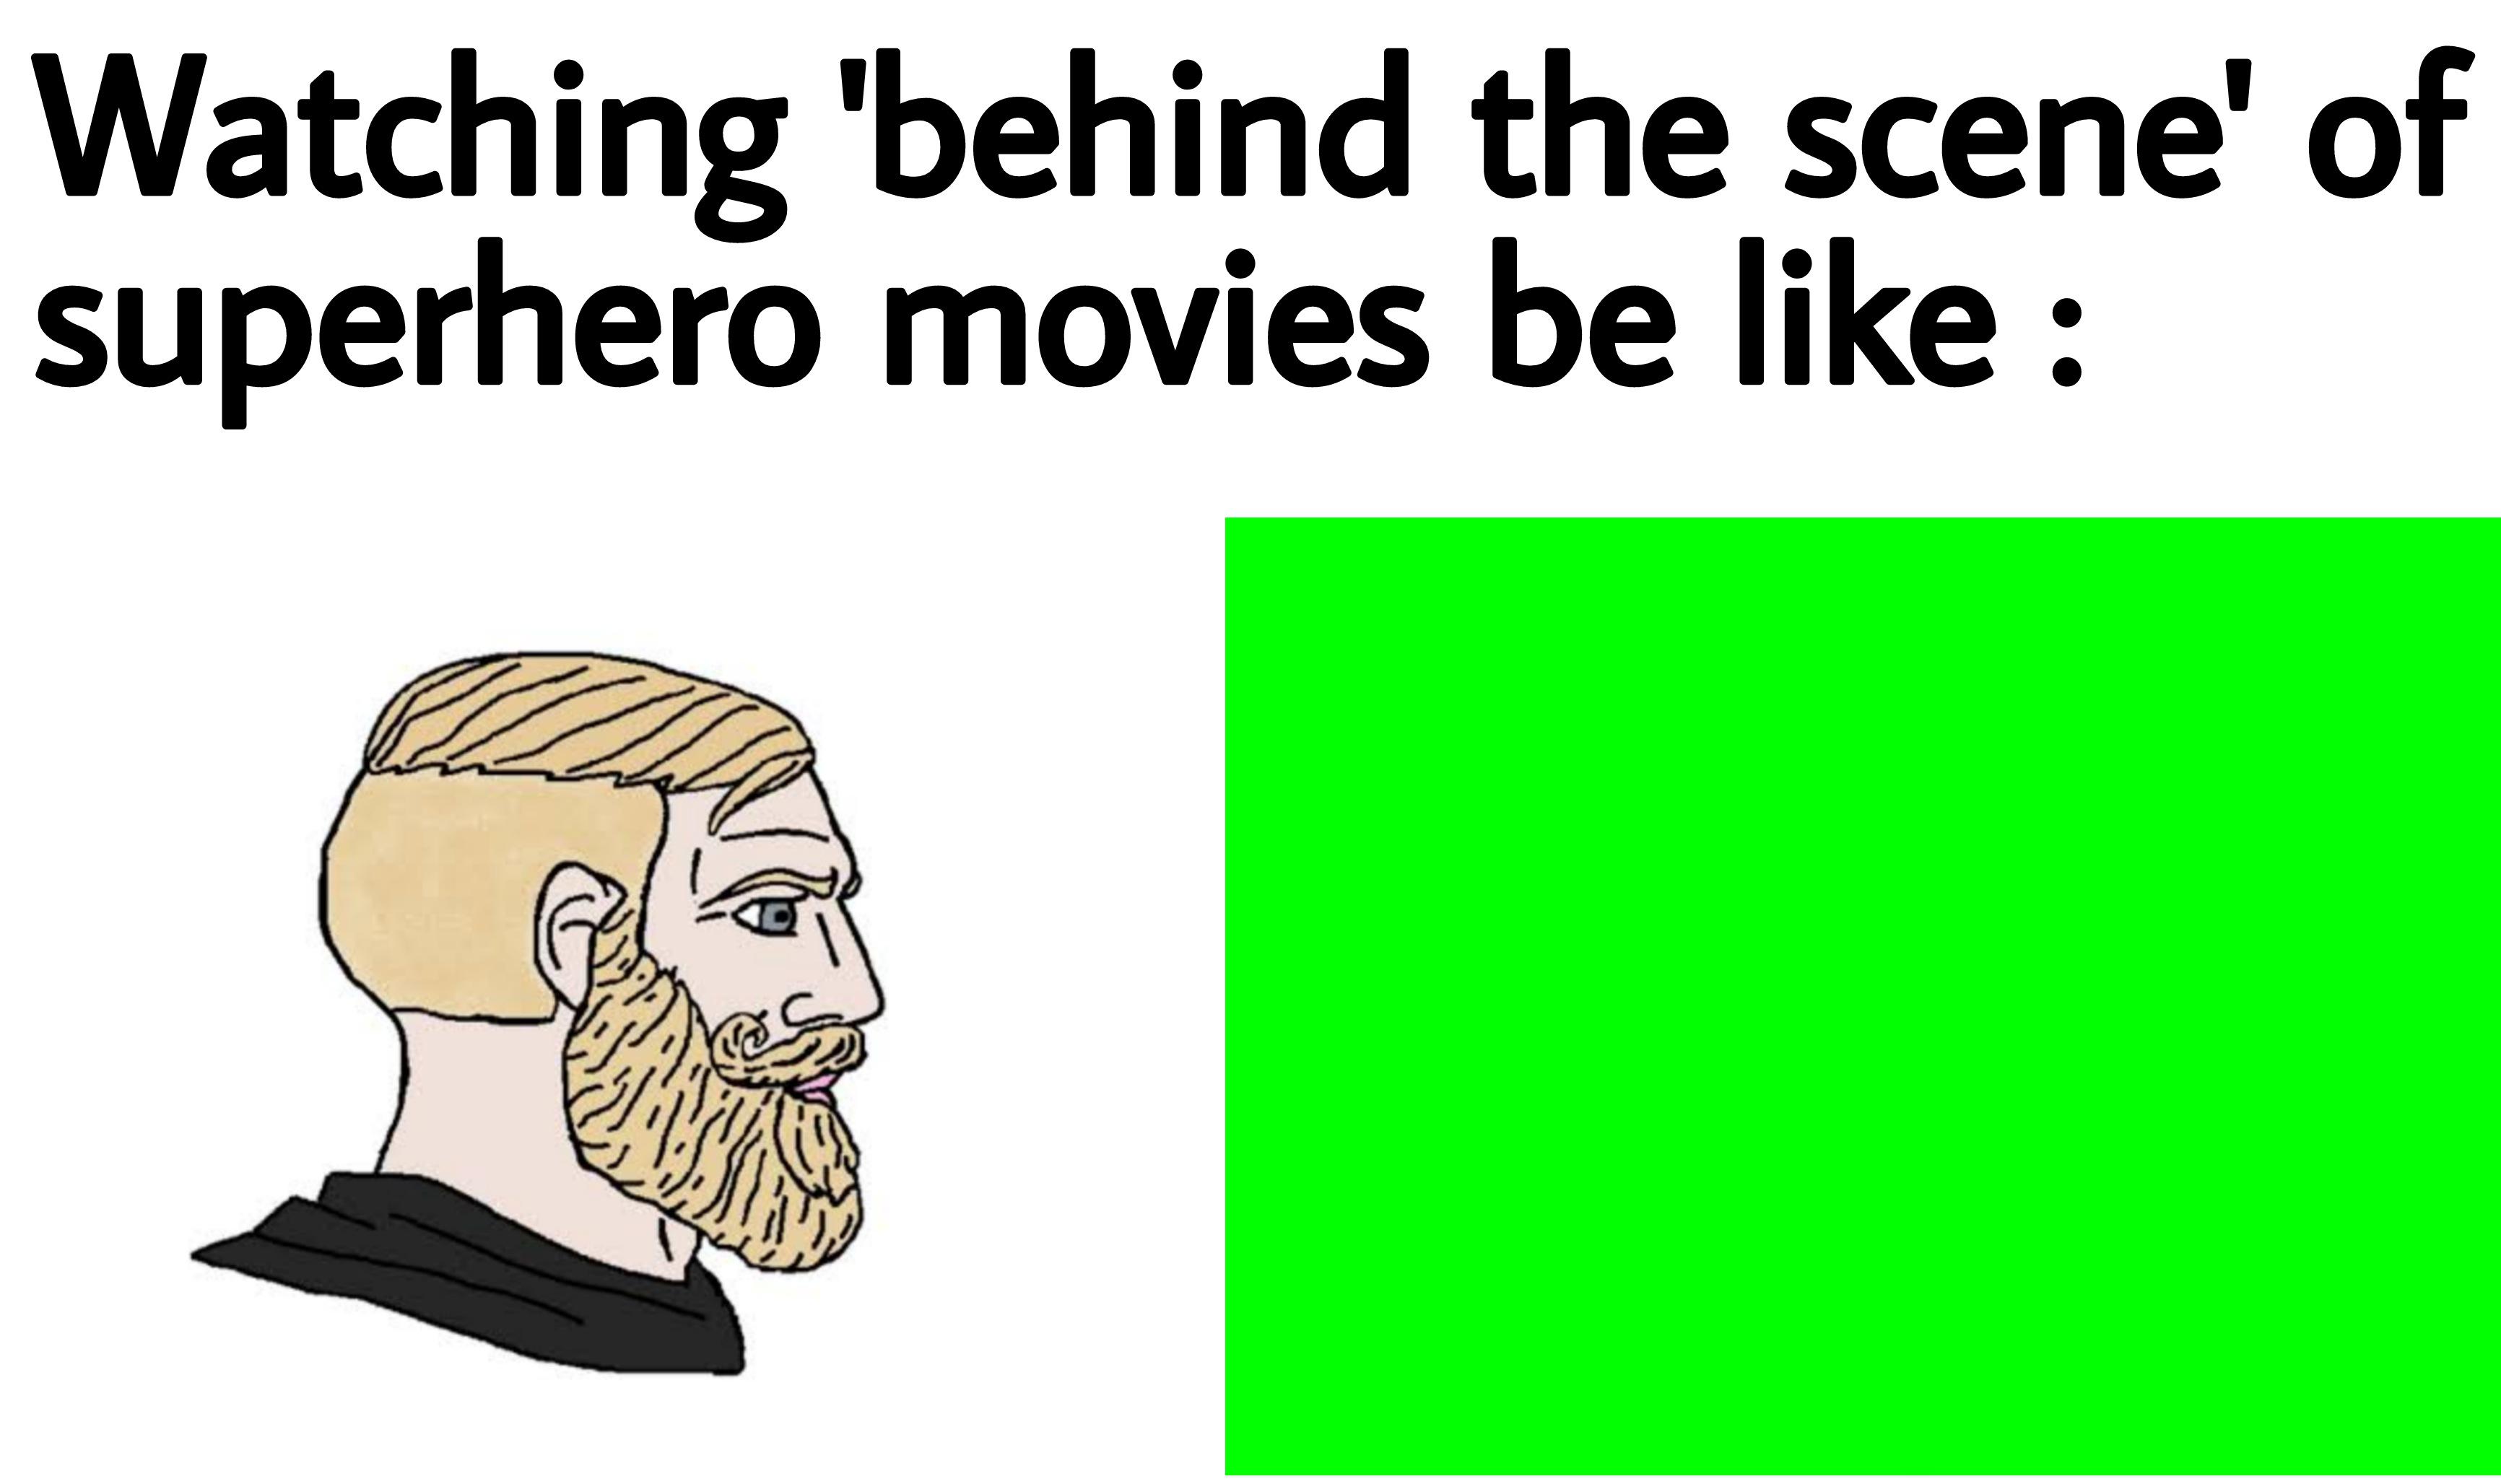 awesome pics and funny memes - cartoon - Watching 'behind the scene' of superhero movies be